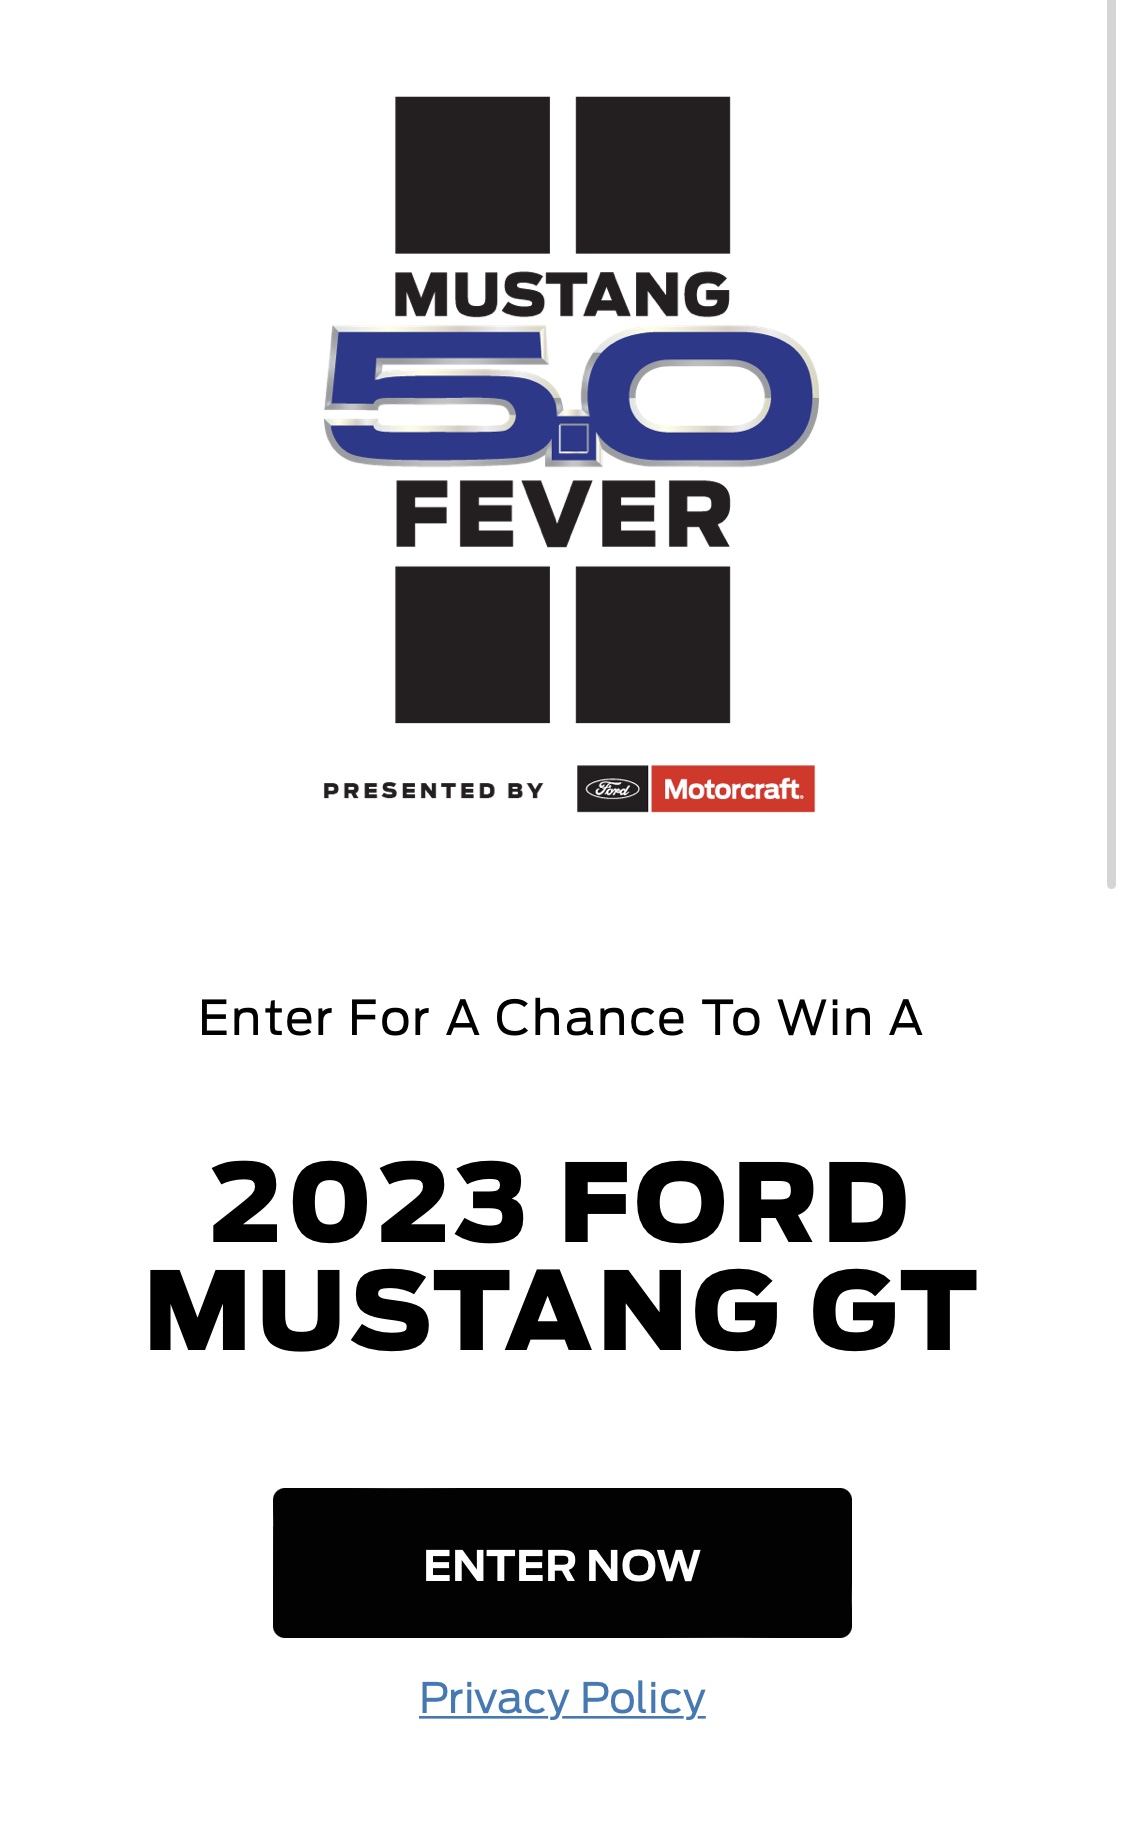 S650 Mustang 5.0 S650 or “Mustang” Confirmed by Ford E0E52BFC-1334-4315-9977-5E6B9112247A